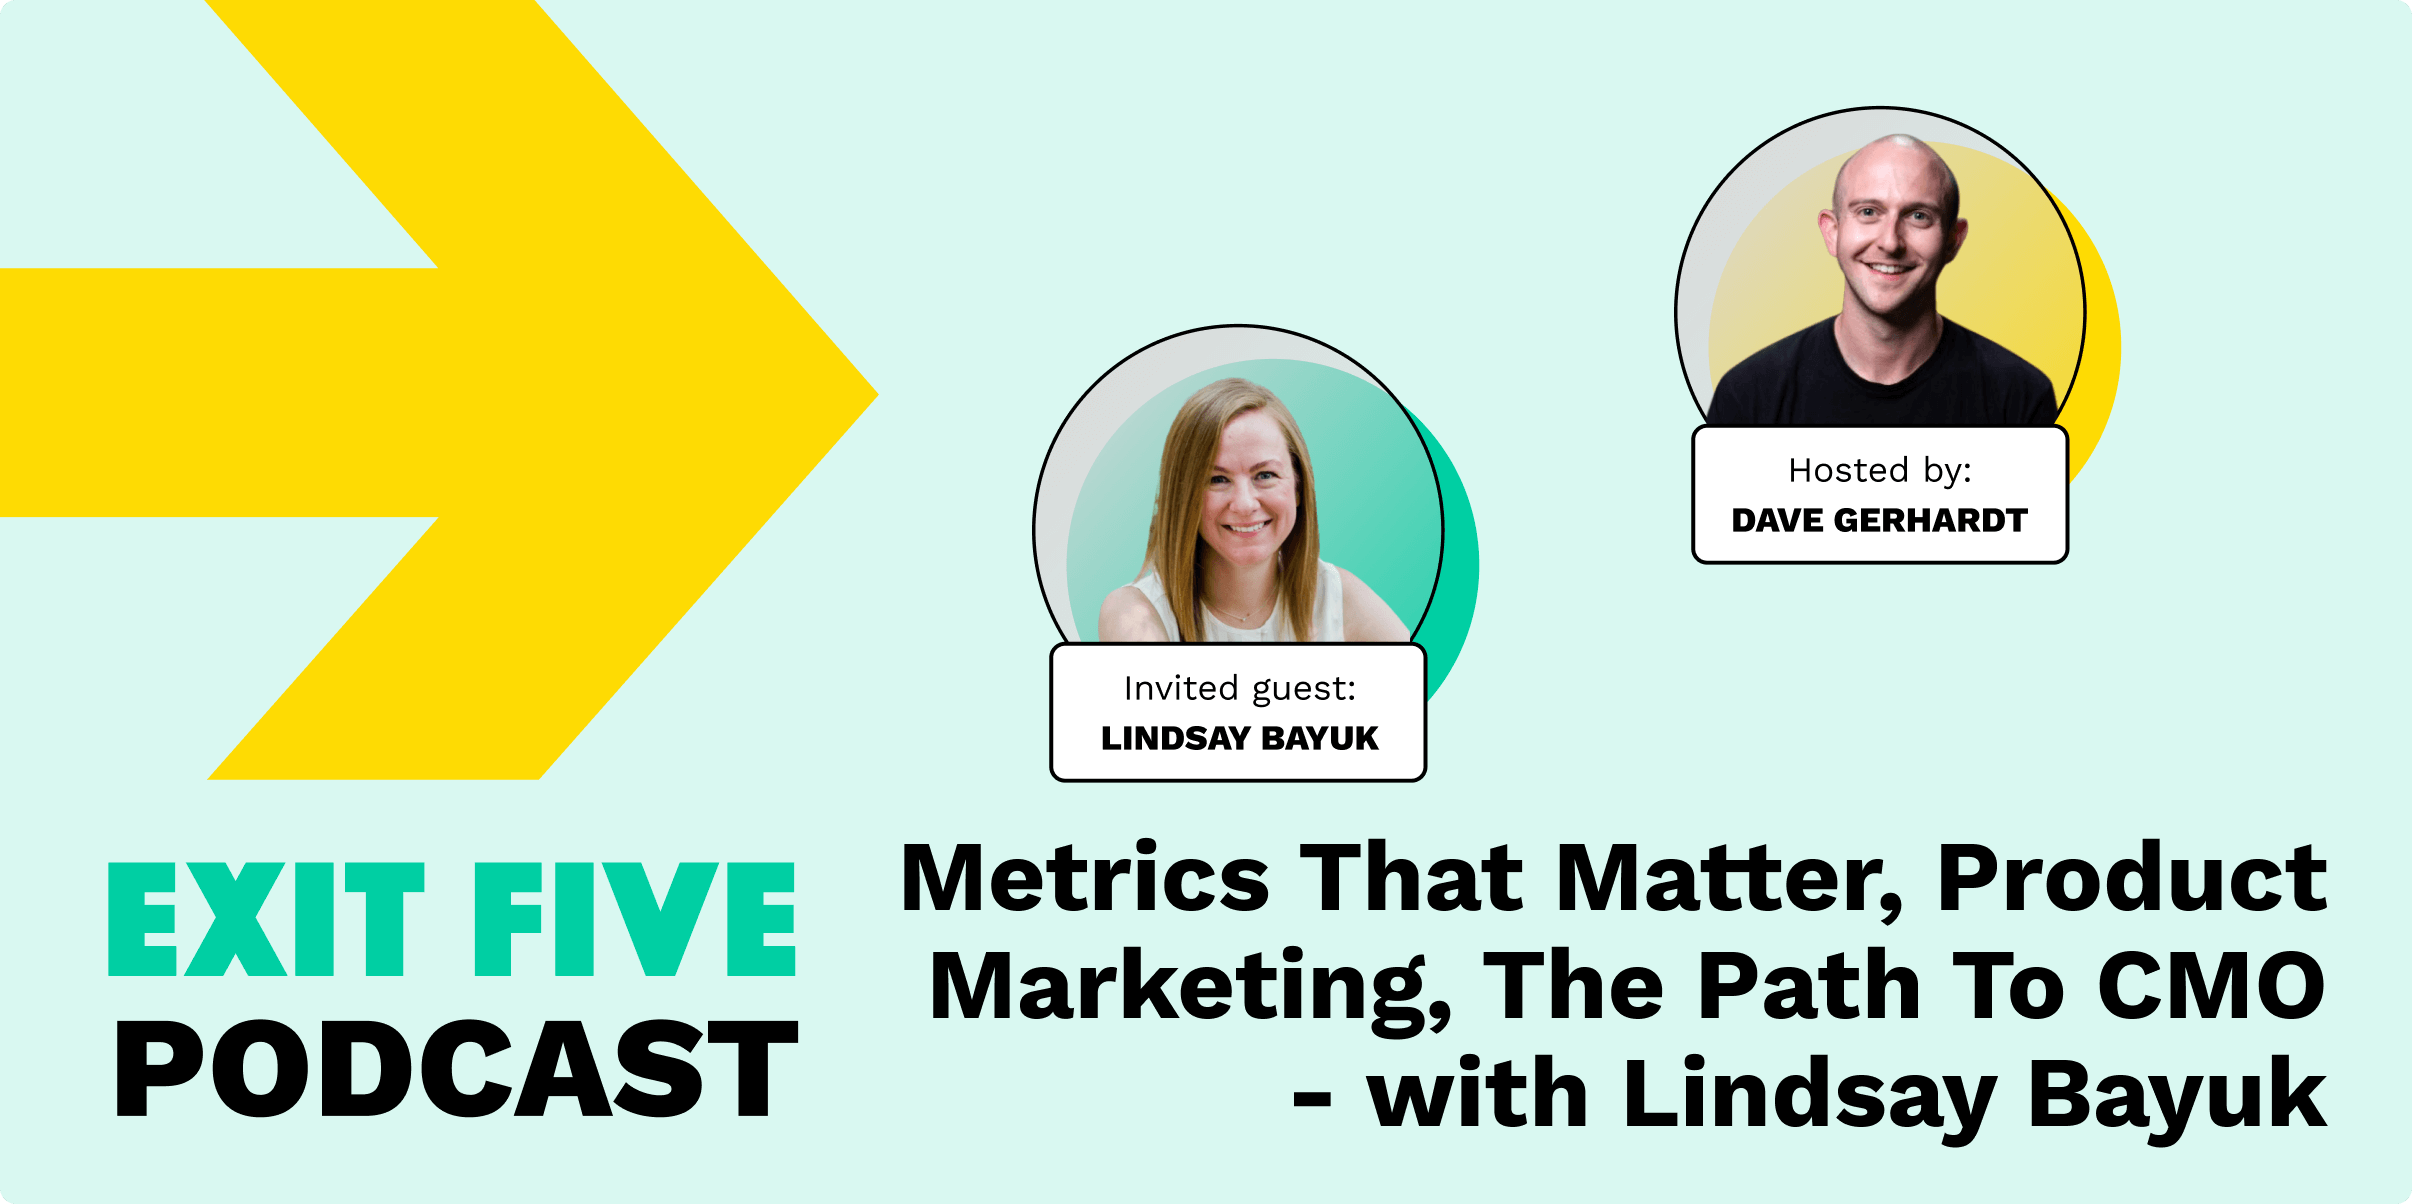 #87: Metrics That Matter, Product Marketing, The Path To CMO - with Lindsay Bayuk, CMO, Pluralsight